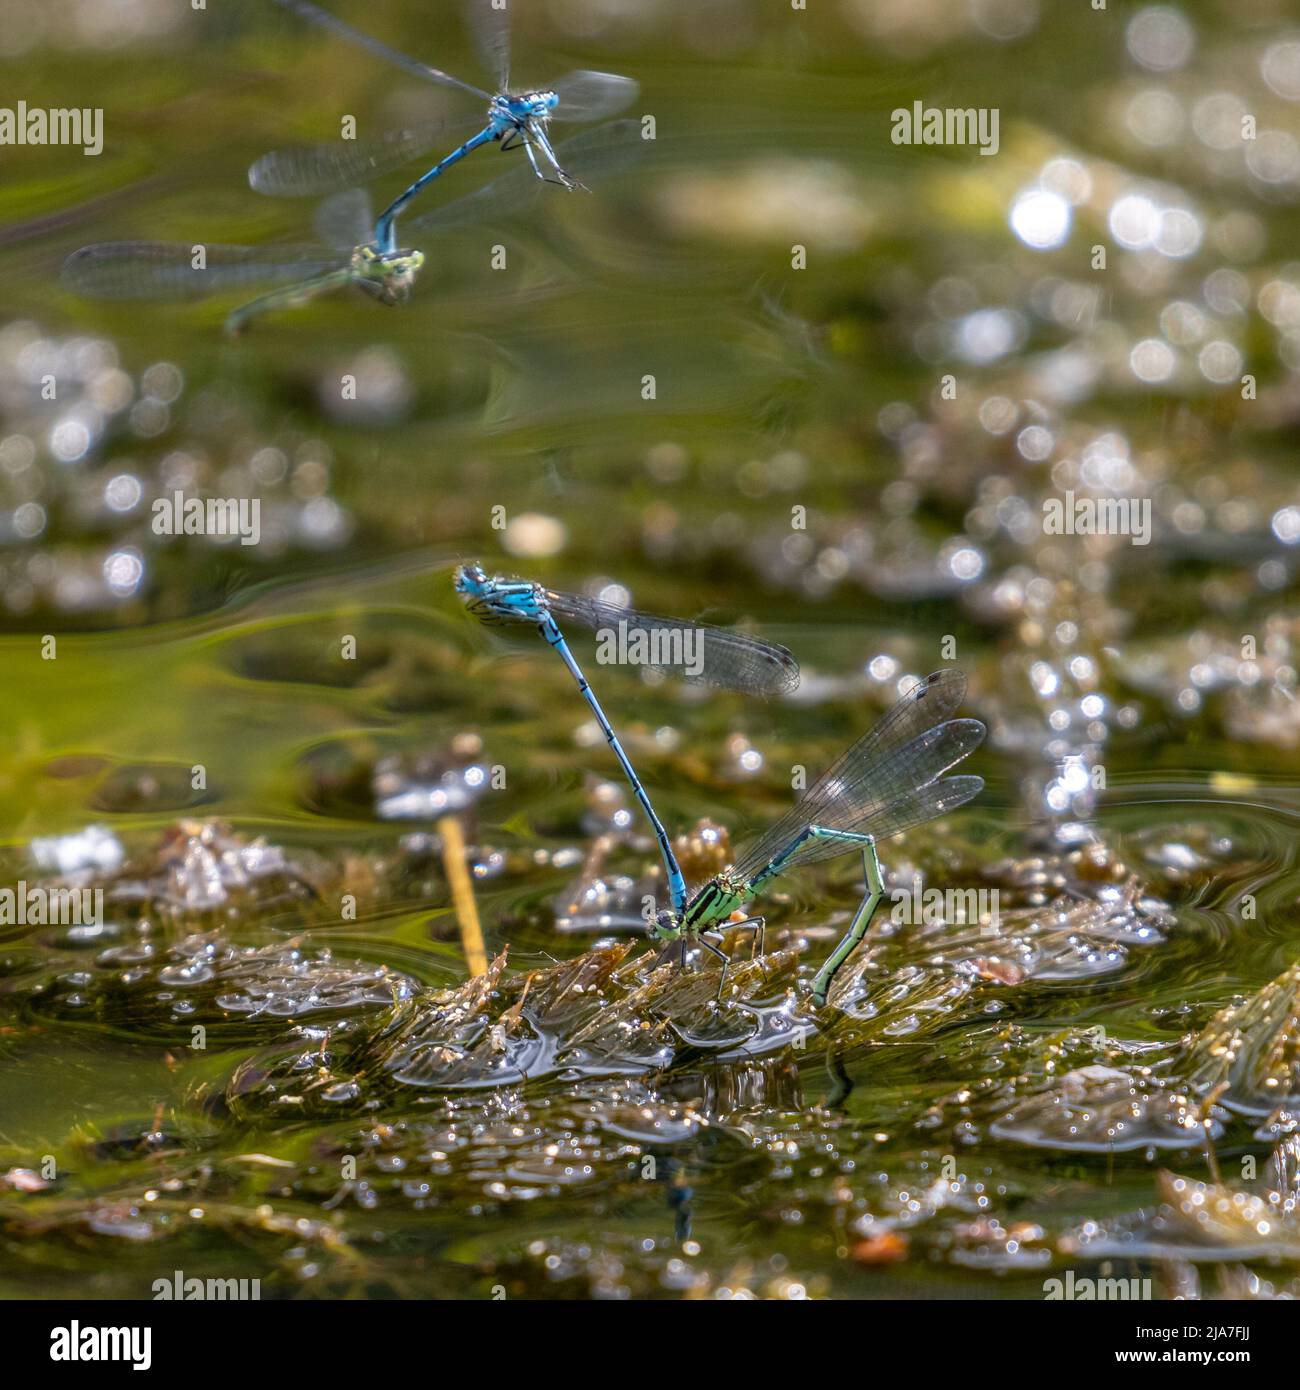 UK wildlife - 28 May 2022: Two pairs of azure damselflies (Coenagrion puella) laying eggs (ovipositing) with the males leading and protecting the females in a shallow pond, Otley, West Yorkshire, England Credit: Rebecca Cole/Alamy Live News Stock Photo